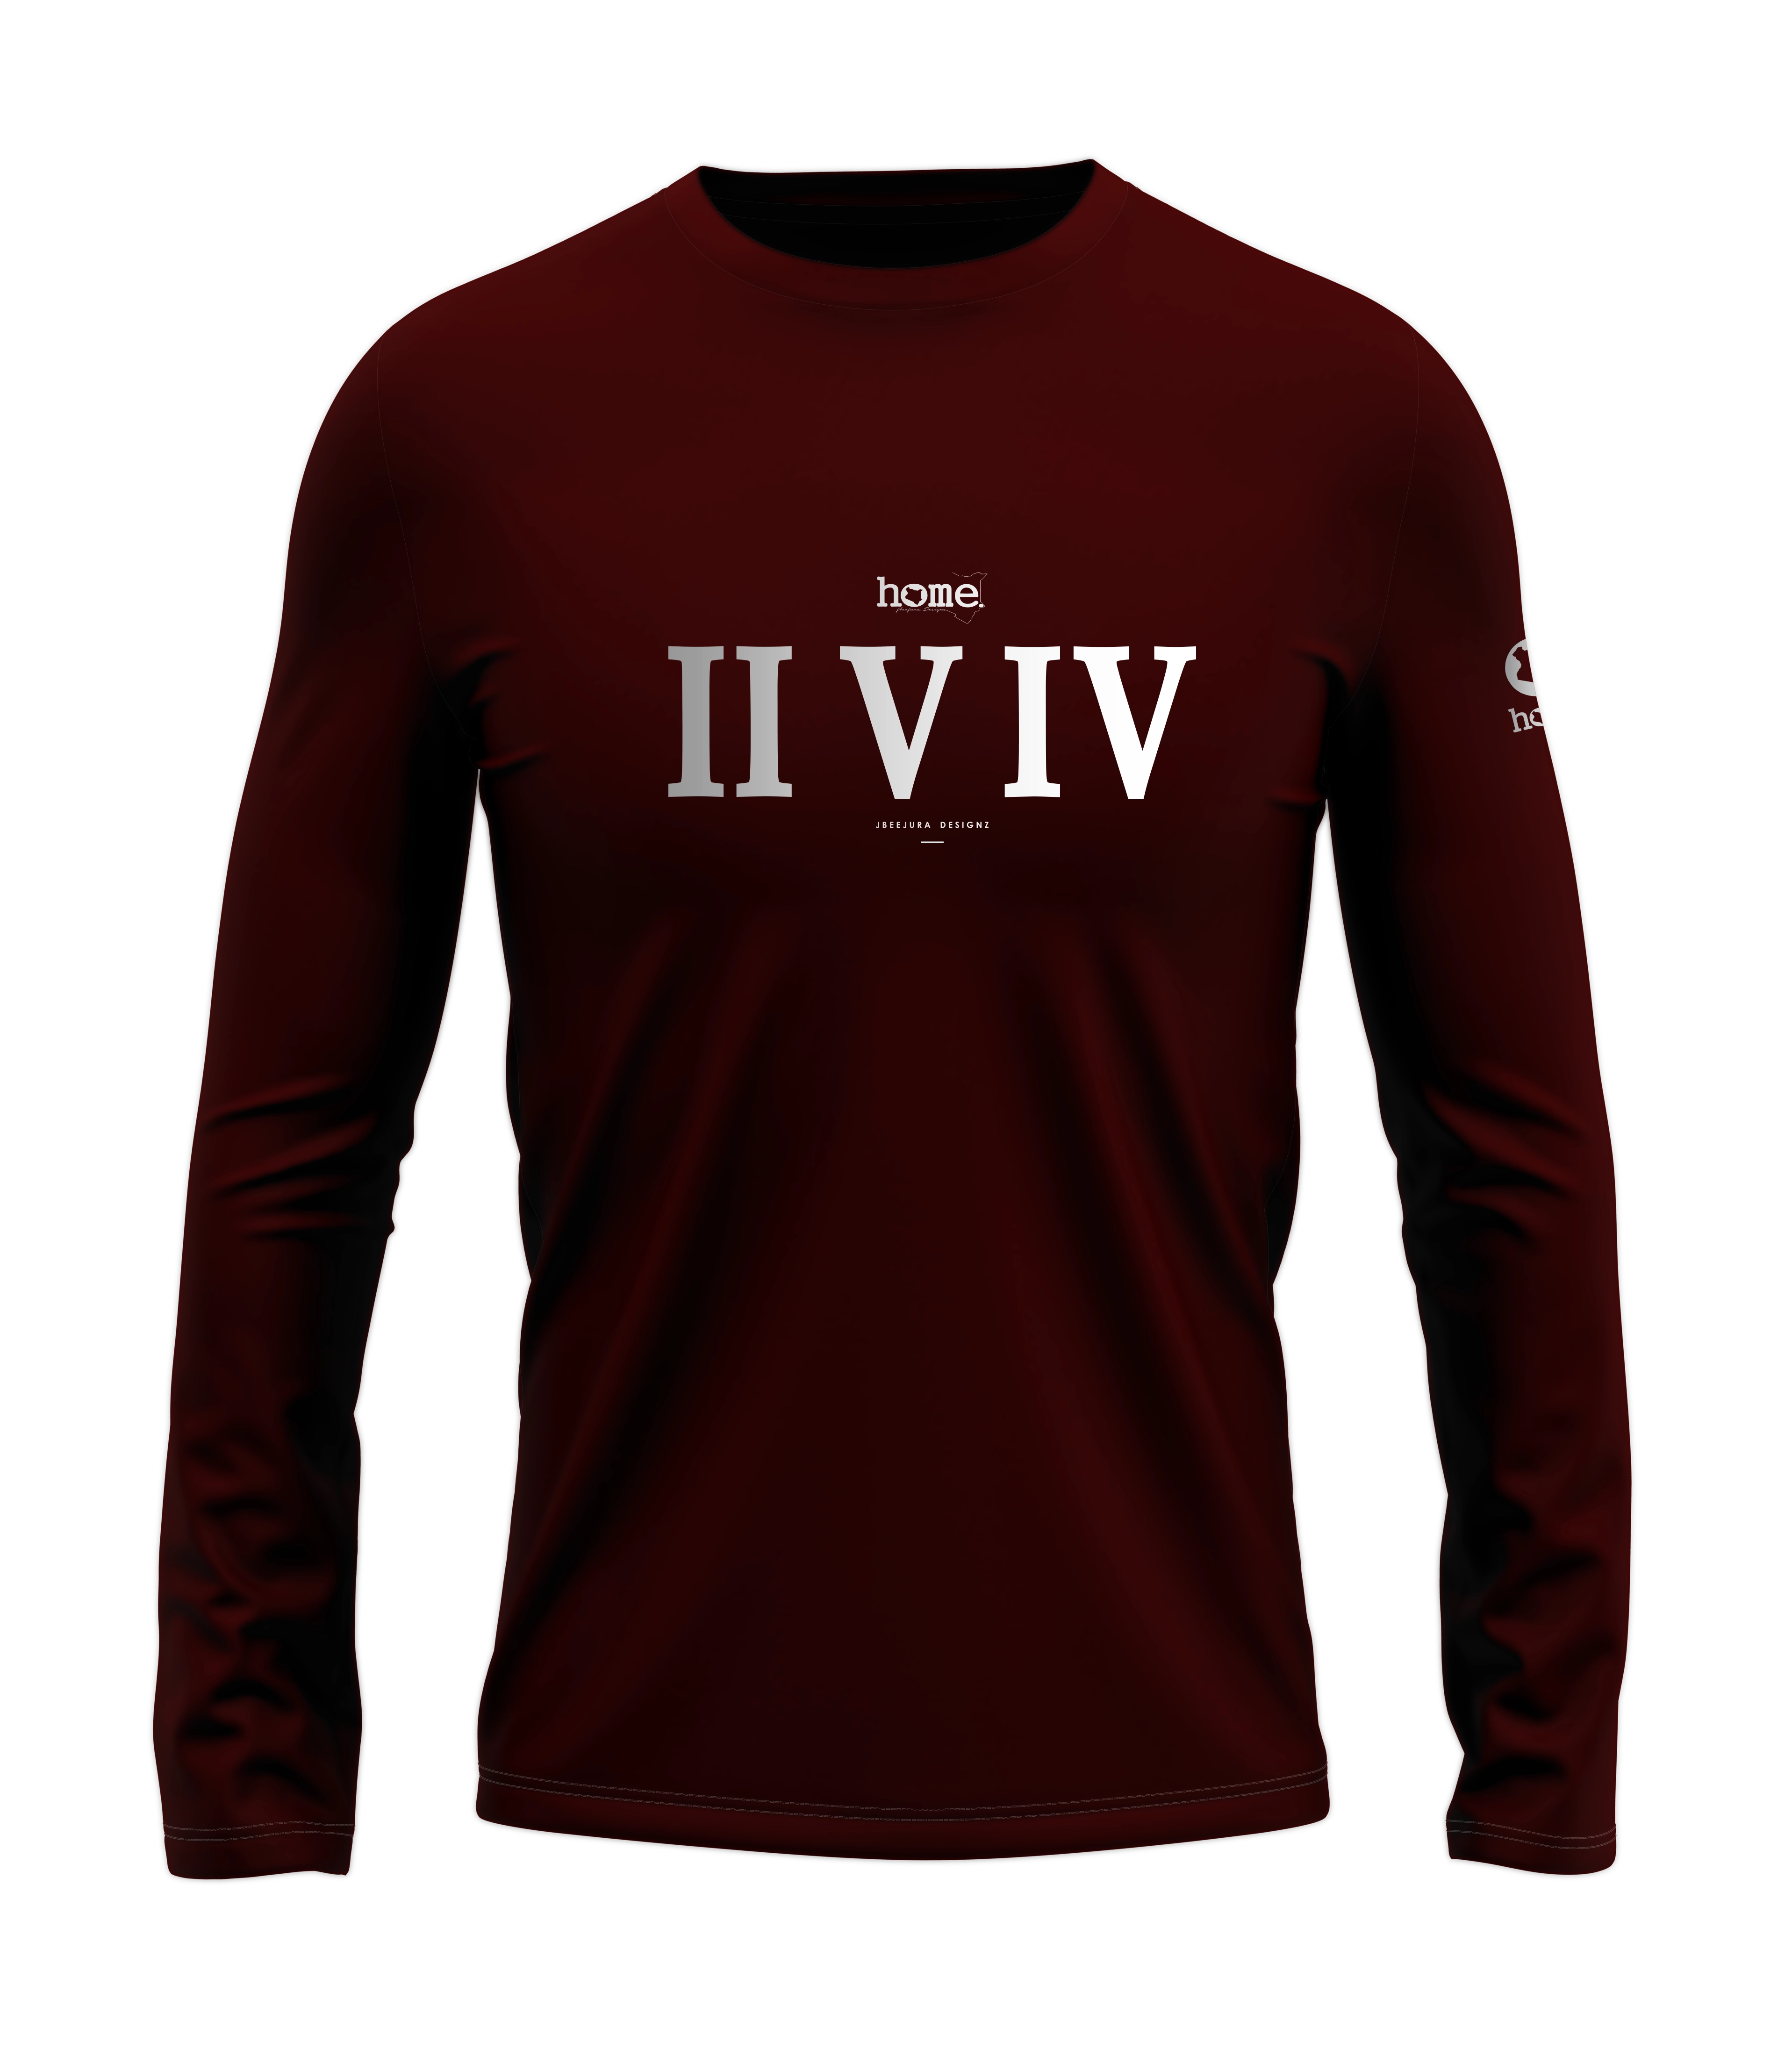 home_254 LONG-SLEEVED MAROON T-SHIRT WITH A SILVER ROMAN NUMERALS PRINT – COTTON PLUS FABRIC